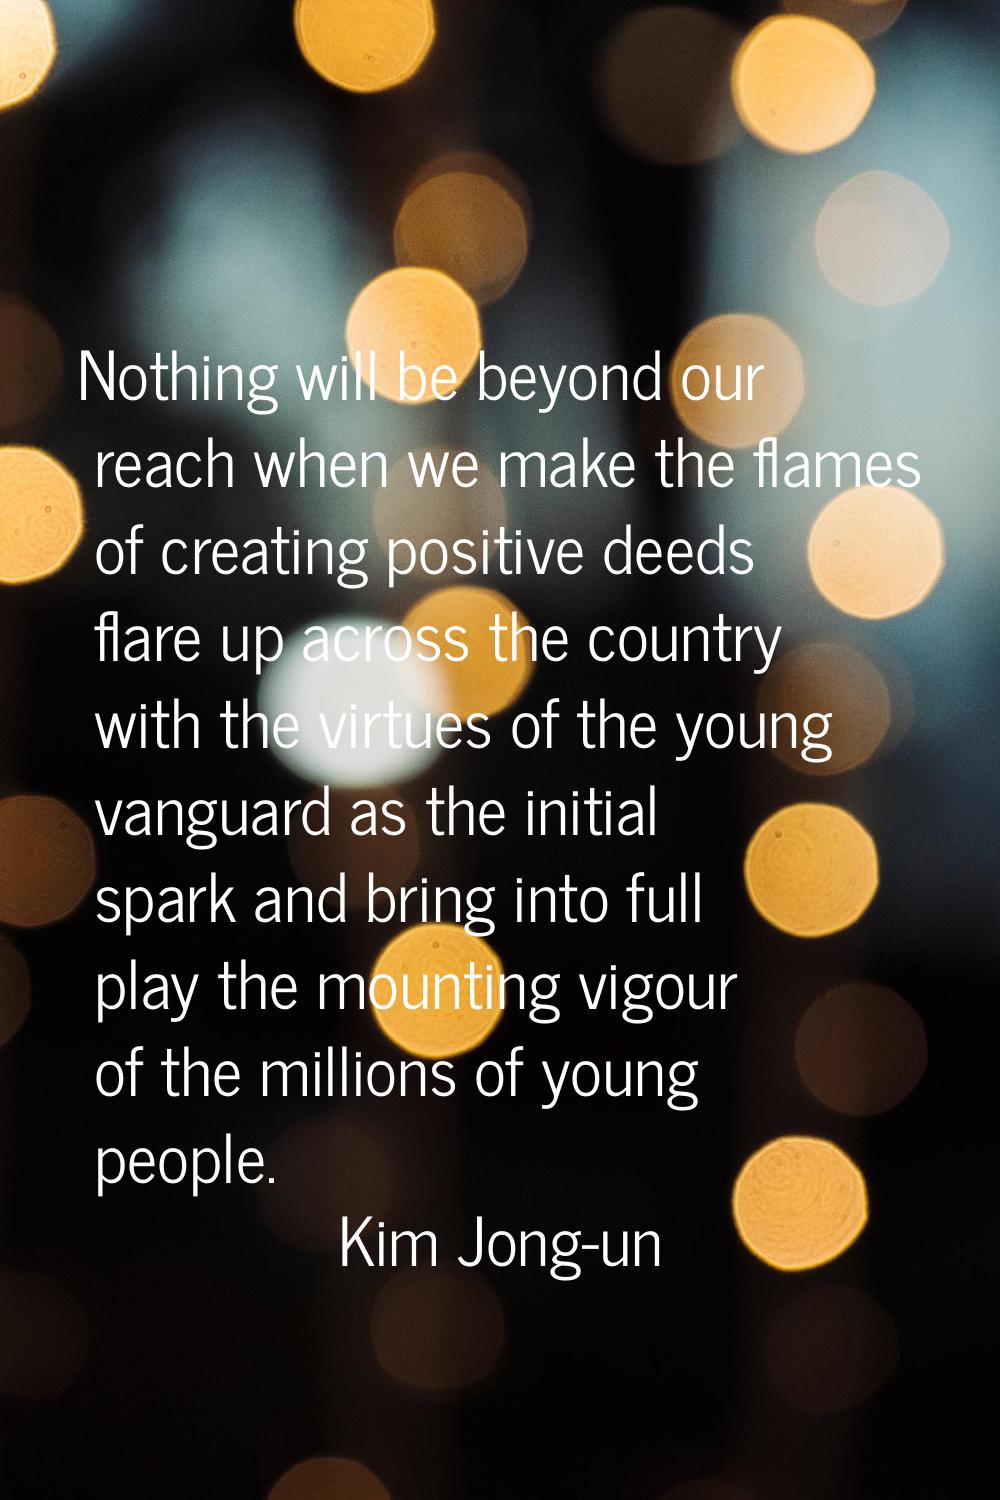 Nothing will be beyond our reach when we make the flames of creating positive deeds flare up across